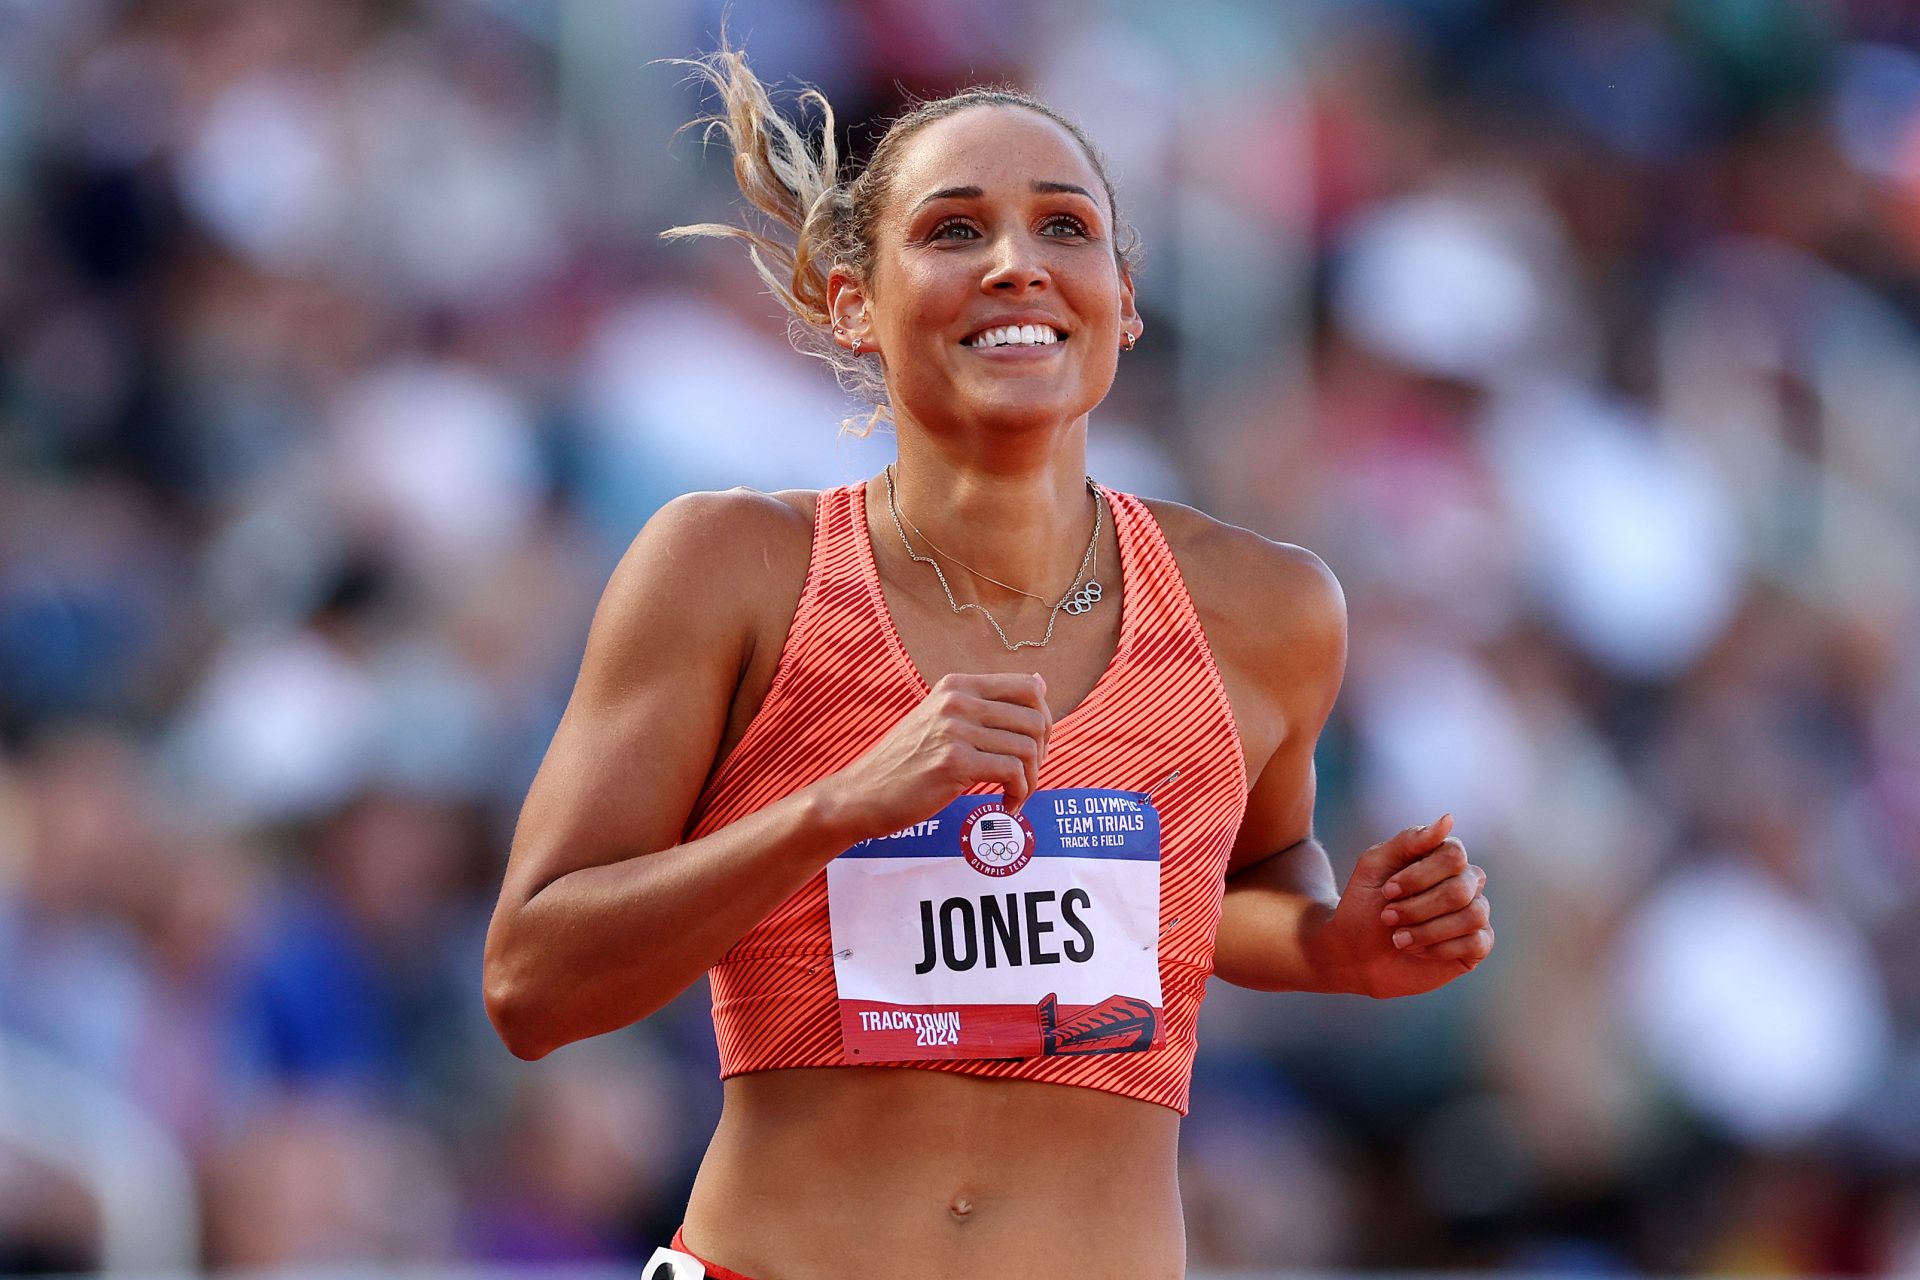 Lolo Jones is still making history at age 41 after overcoming this tragic life event